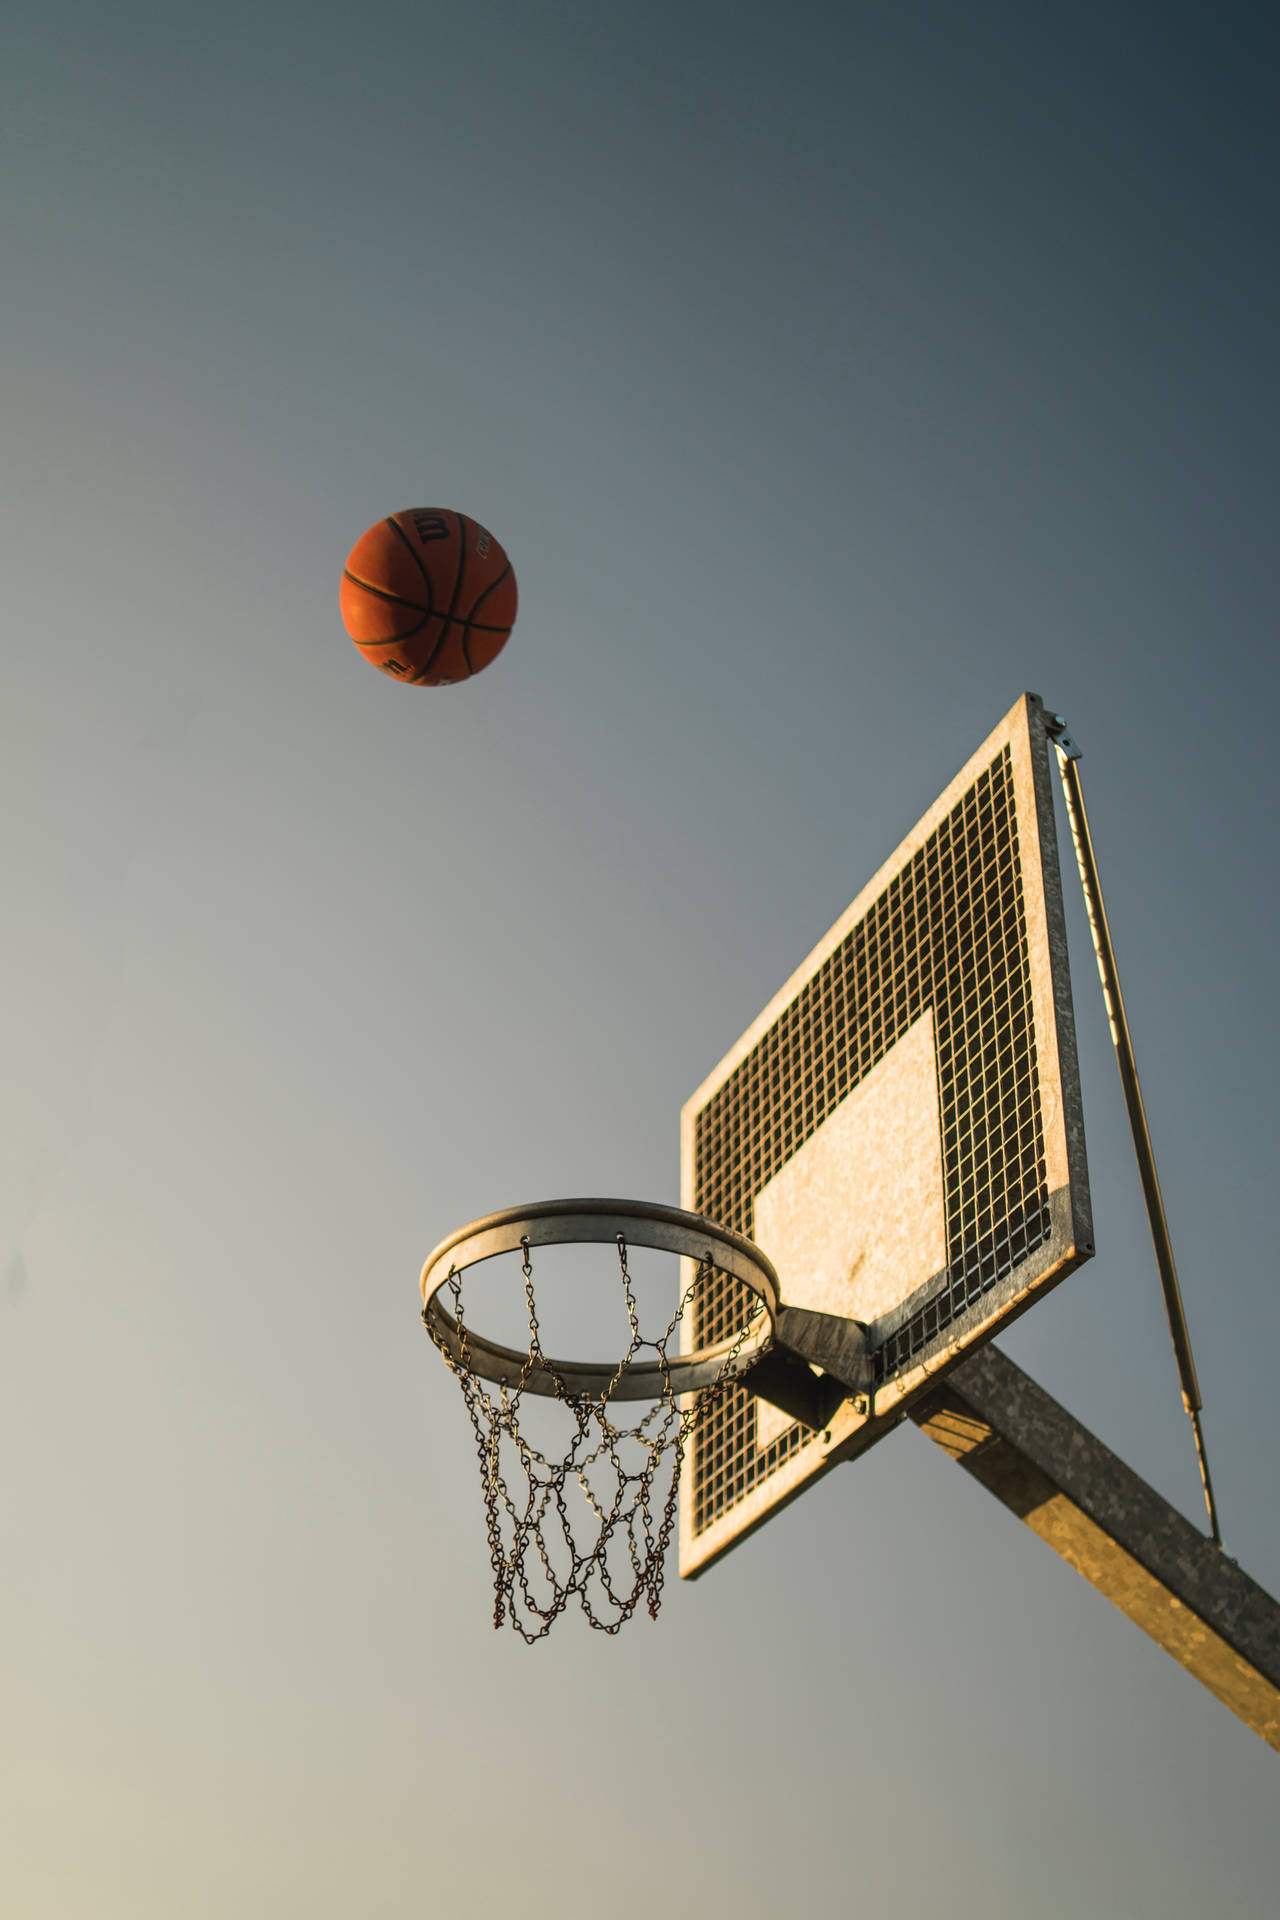 Basketball 4363X6542 Wallpaper and Background Image